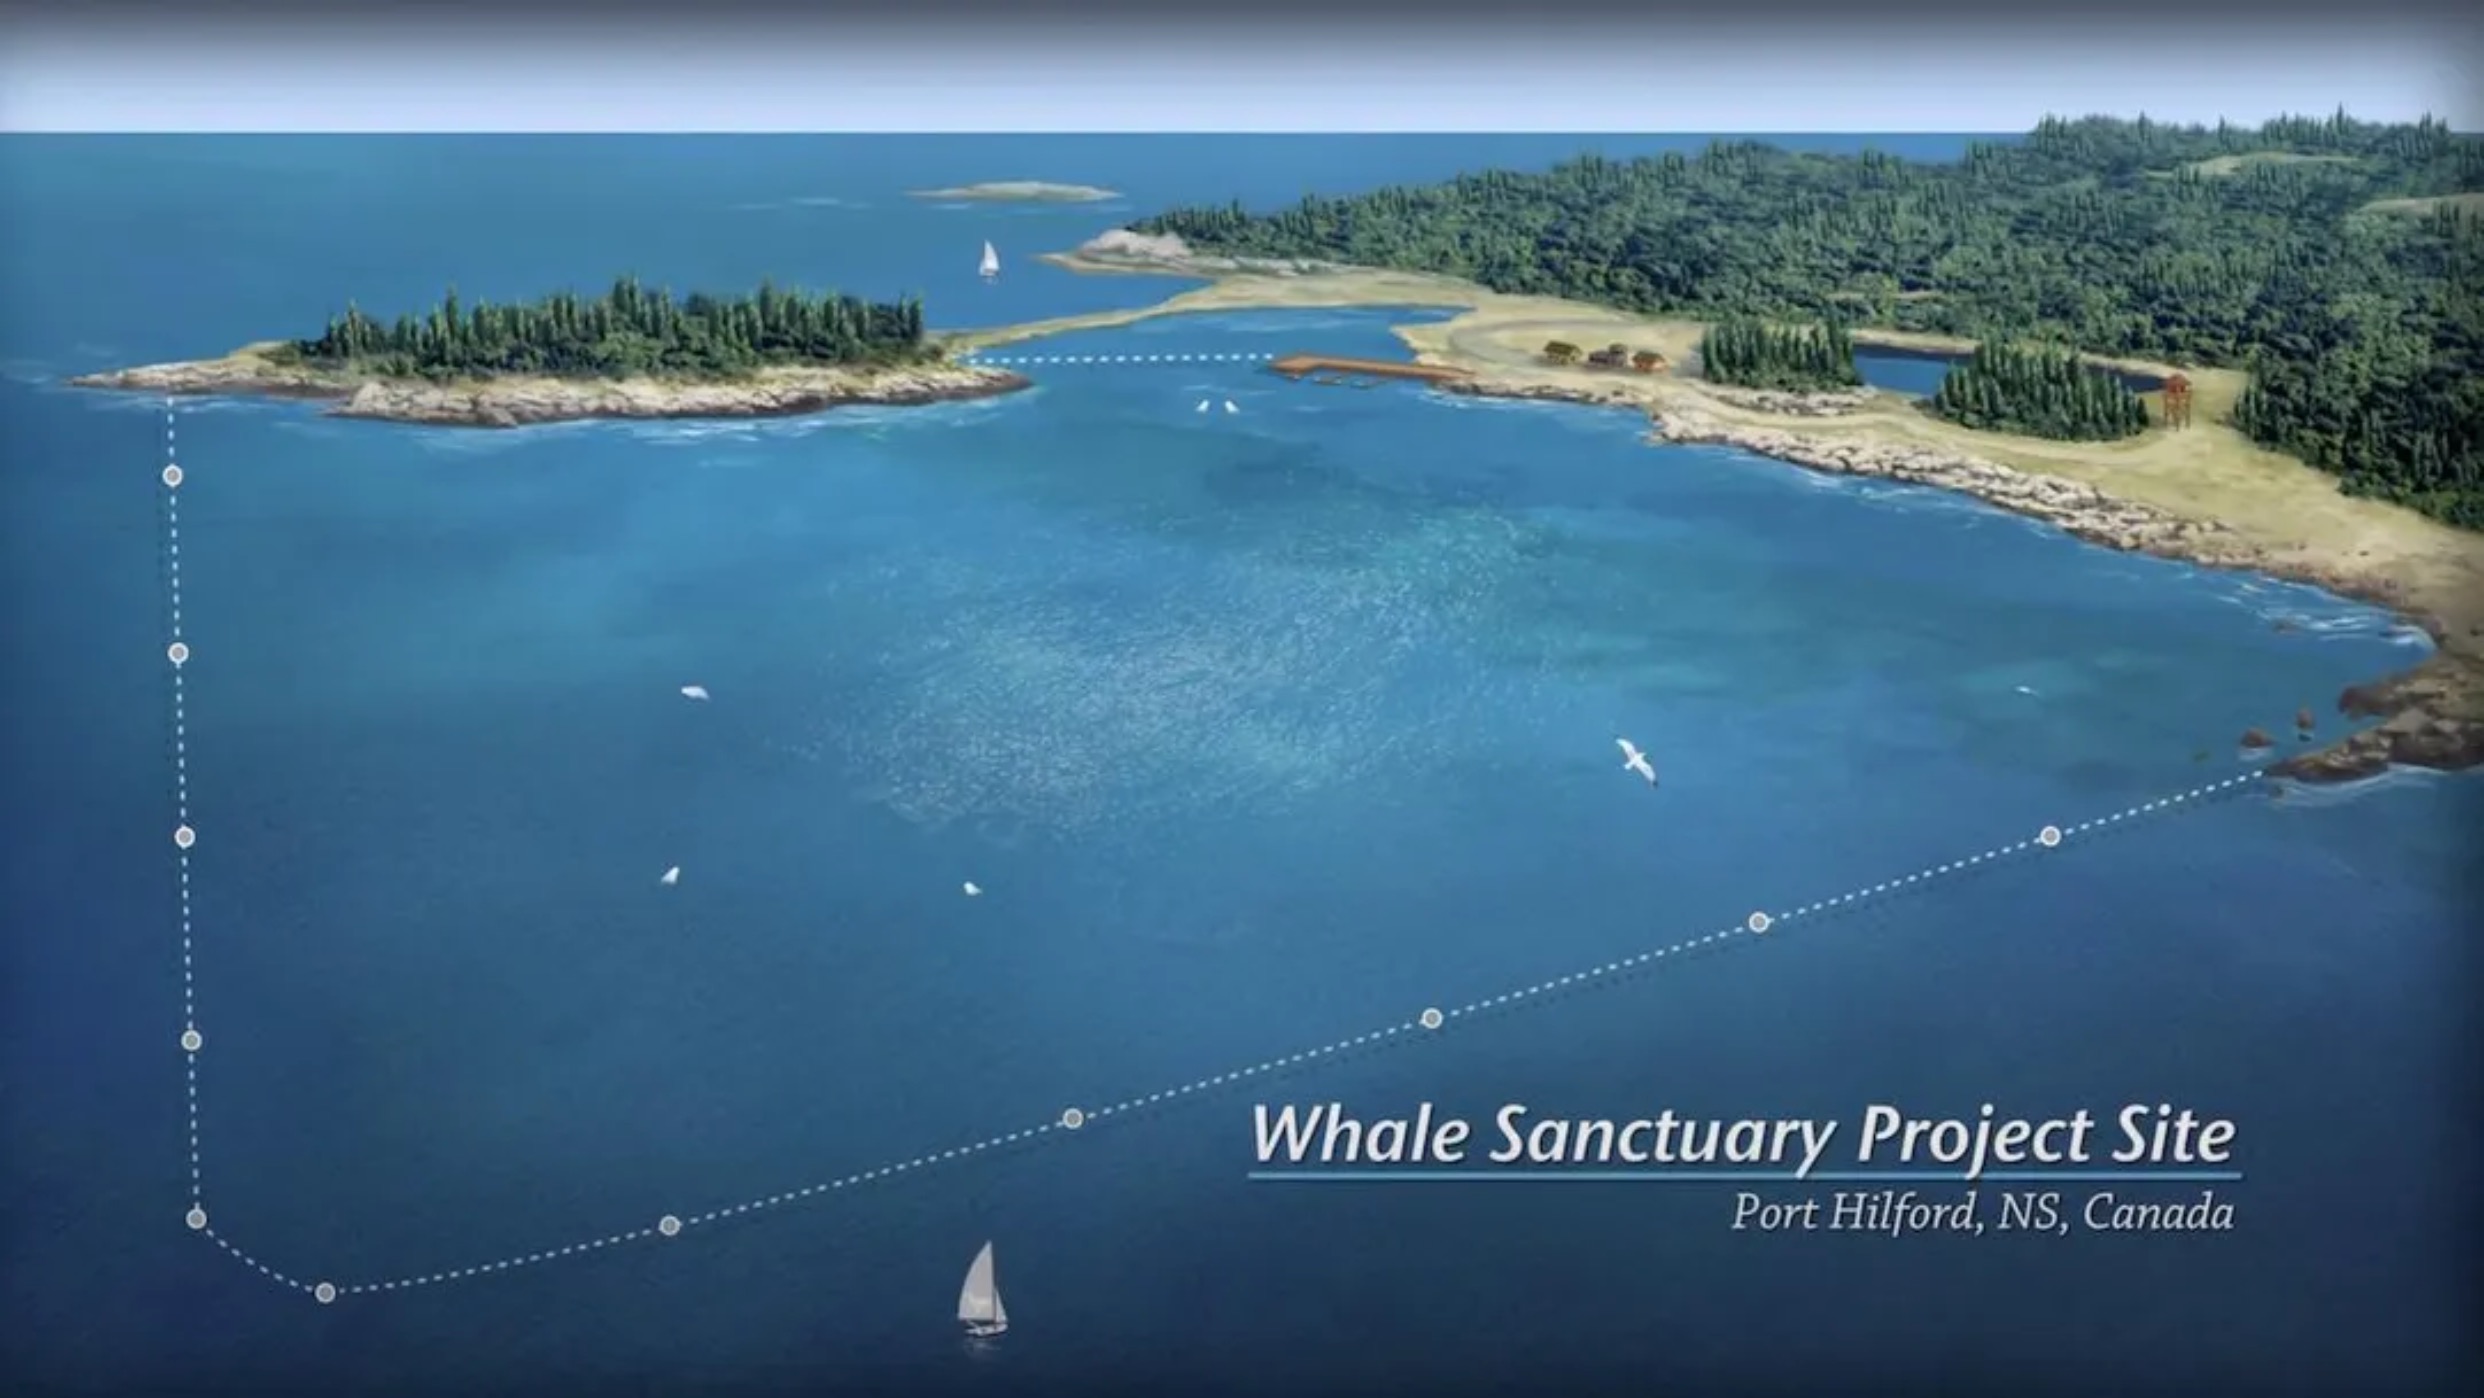 The sanctuary is planned for Port Hilford Bay in Nova Scotia and will include 110 acres (44.5 hectares) of habitat for the whales. This amount of space will be ideal for about eight formerly captive whales.